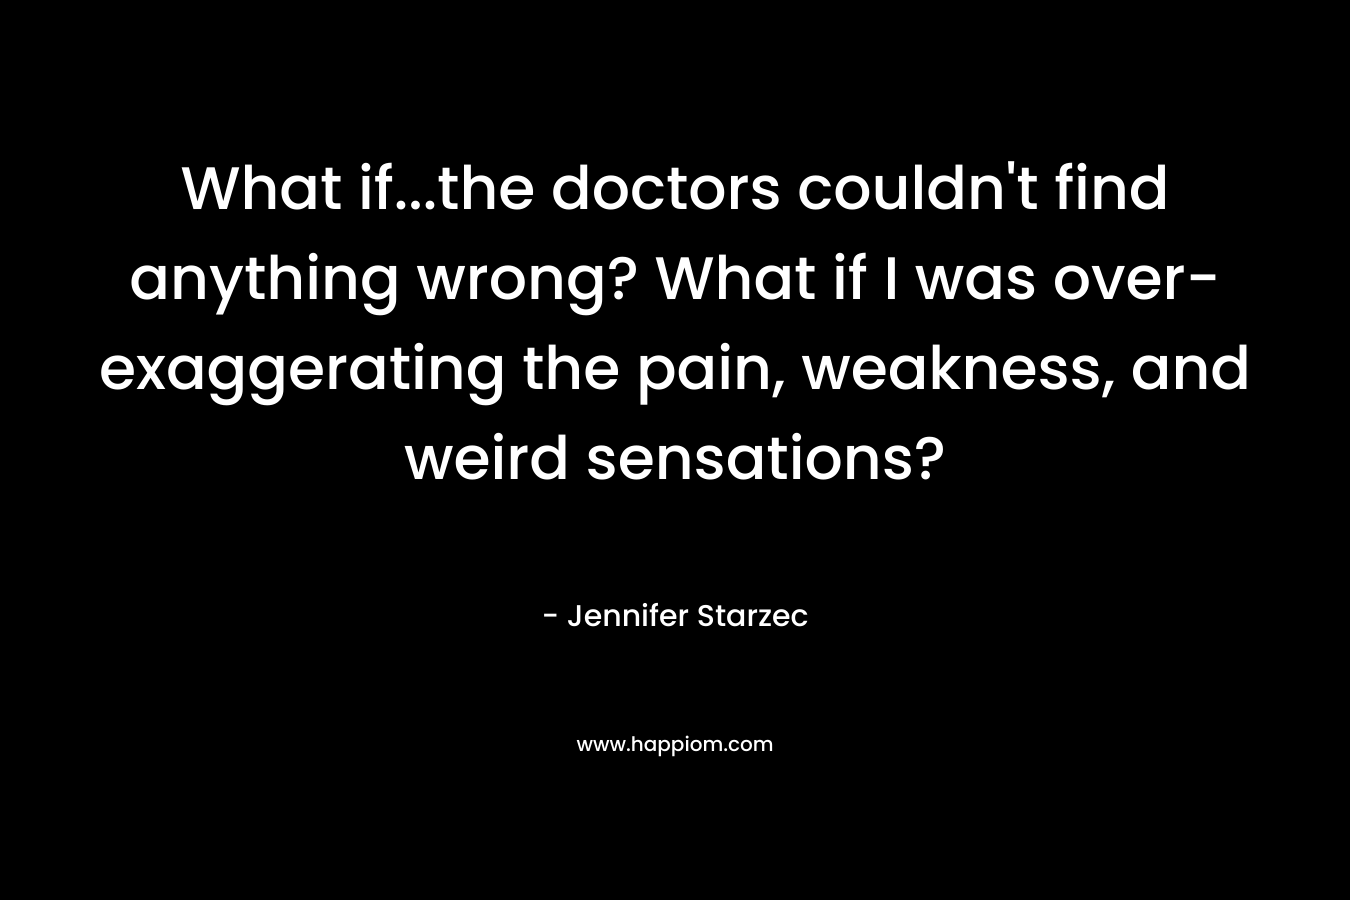 What if…the doctors couldn’t find anything wrong? What if I was over-exaggerating the pain, weakness, and weird sensations? – Jennifer Starzec